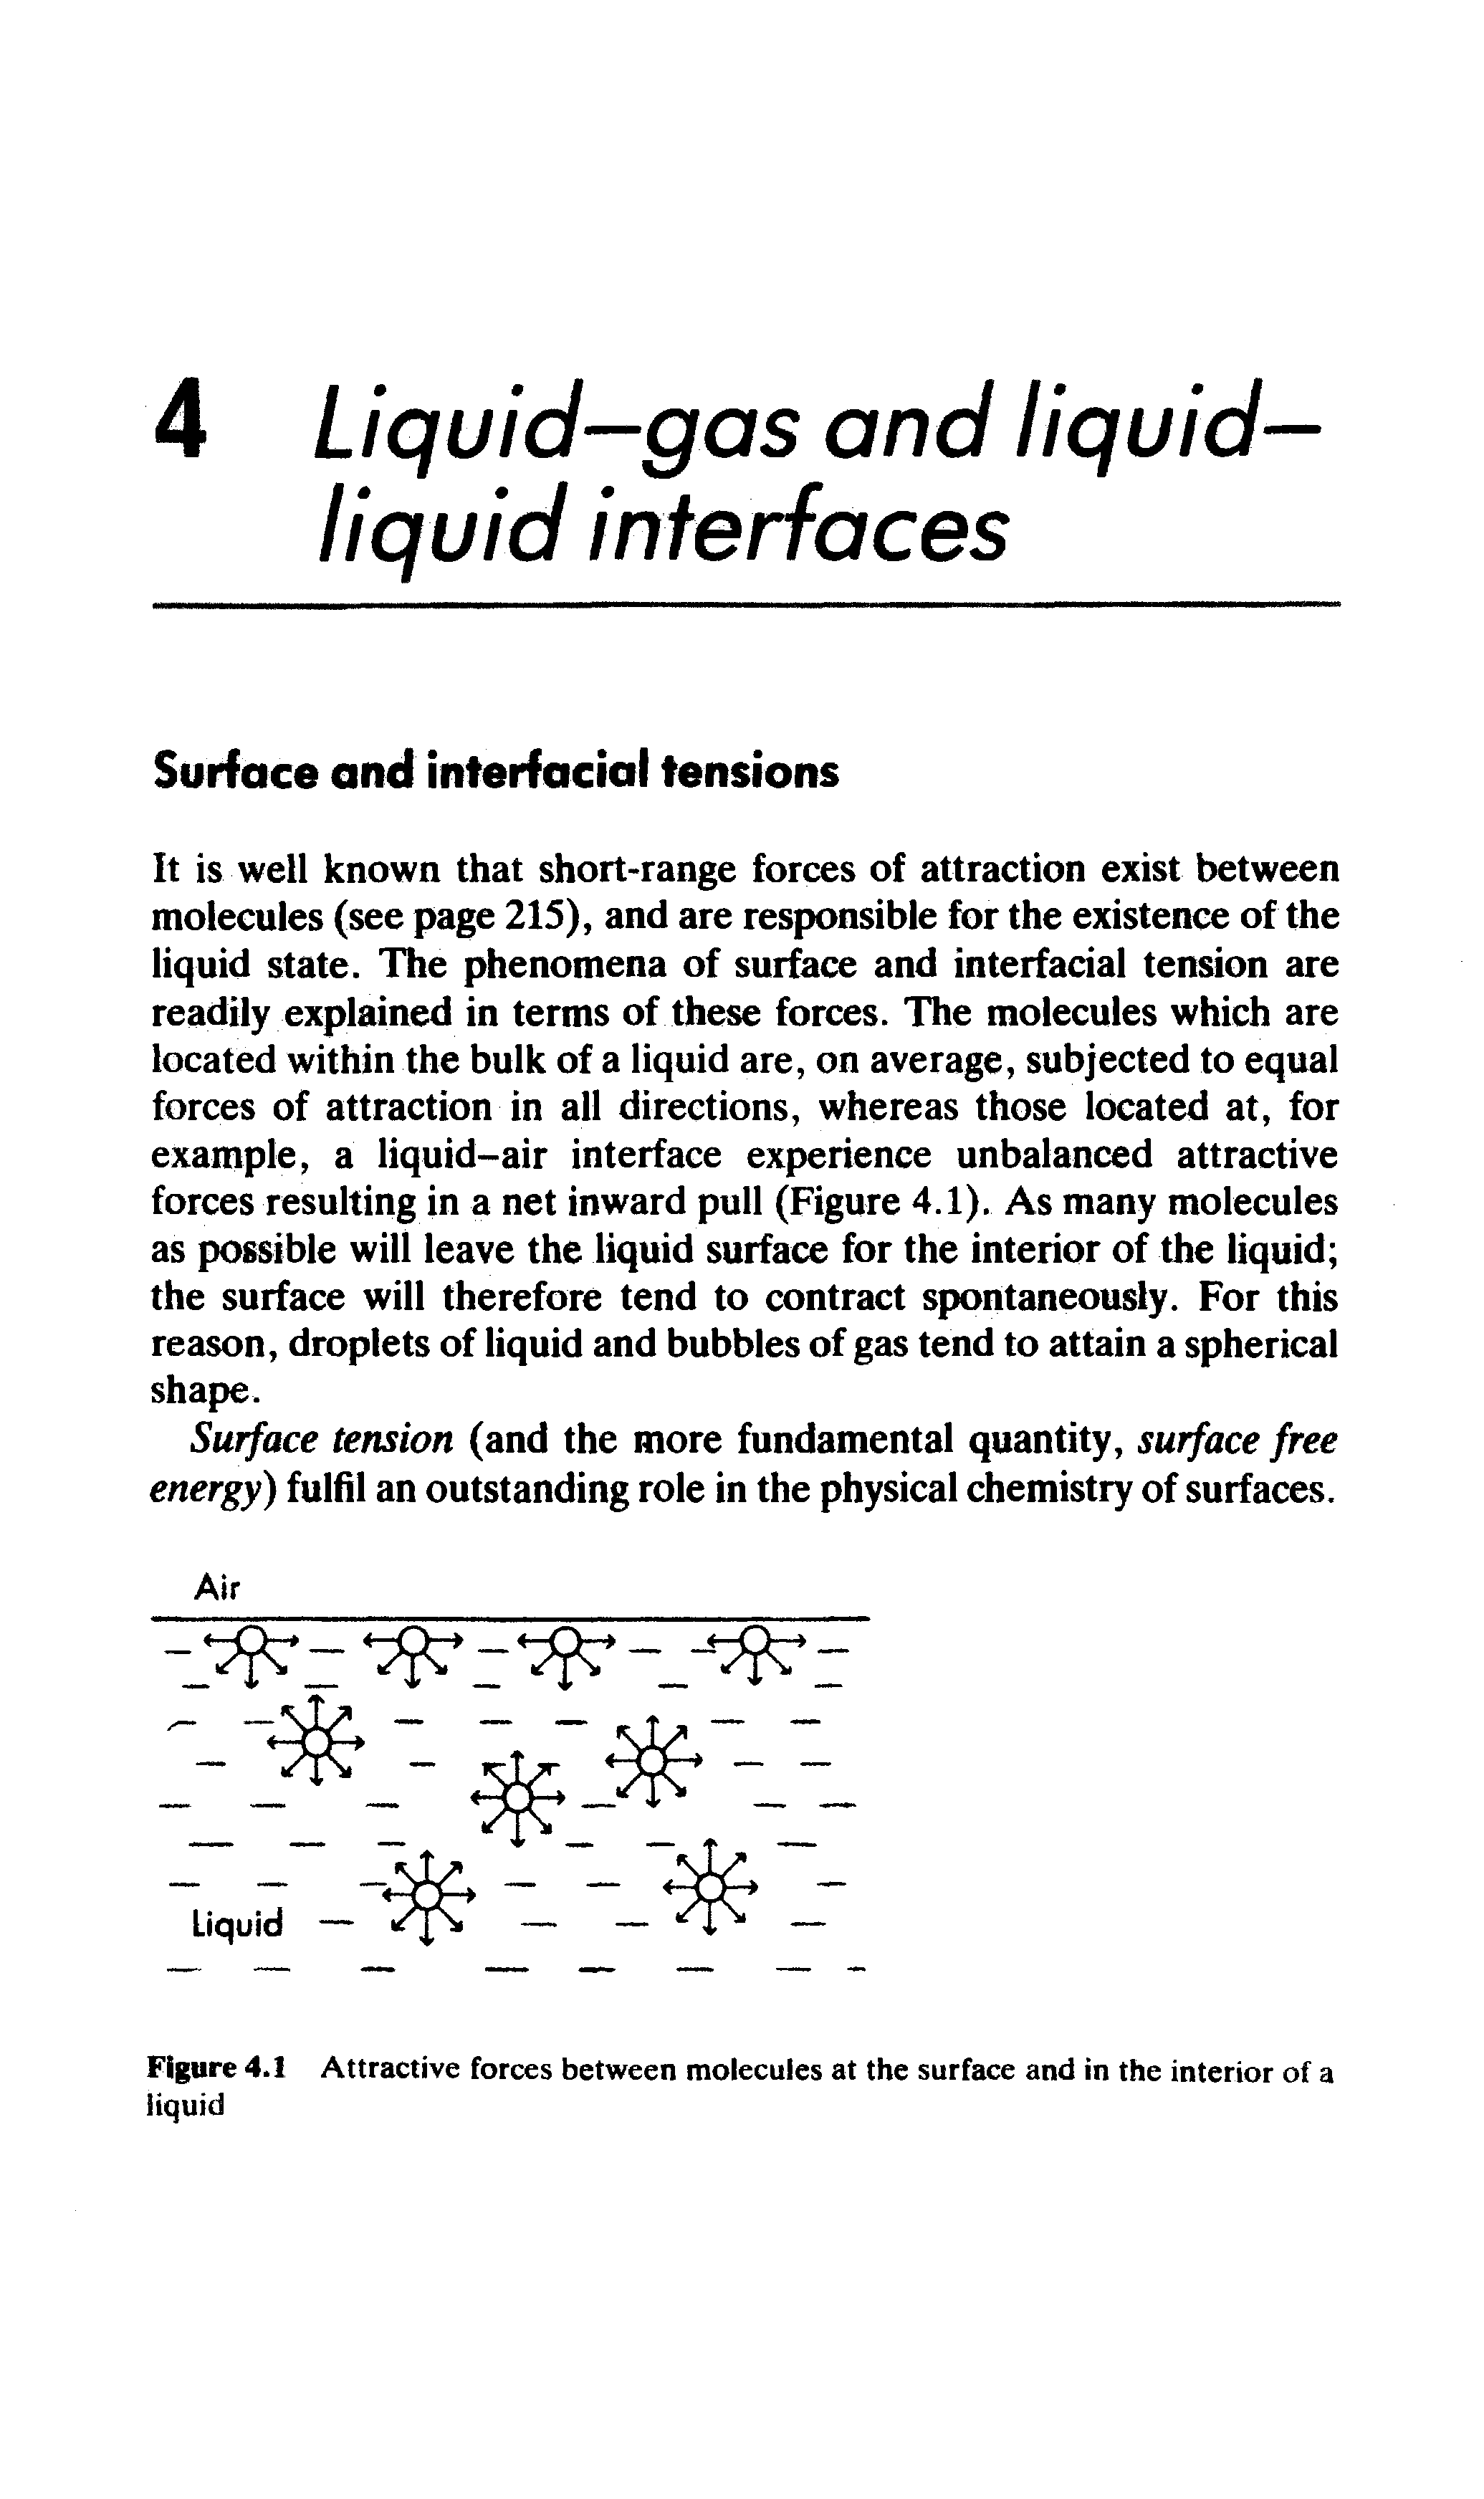 Figure 4.1 Attractive forces between molecules at the surface and in the interior of a liquid...